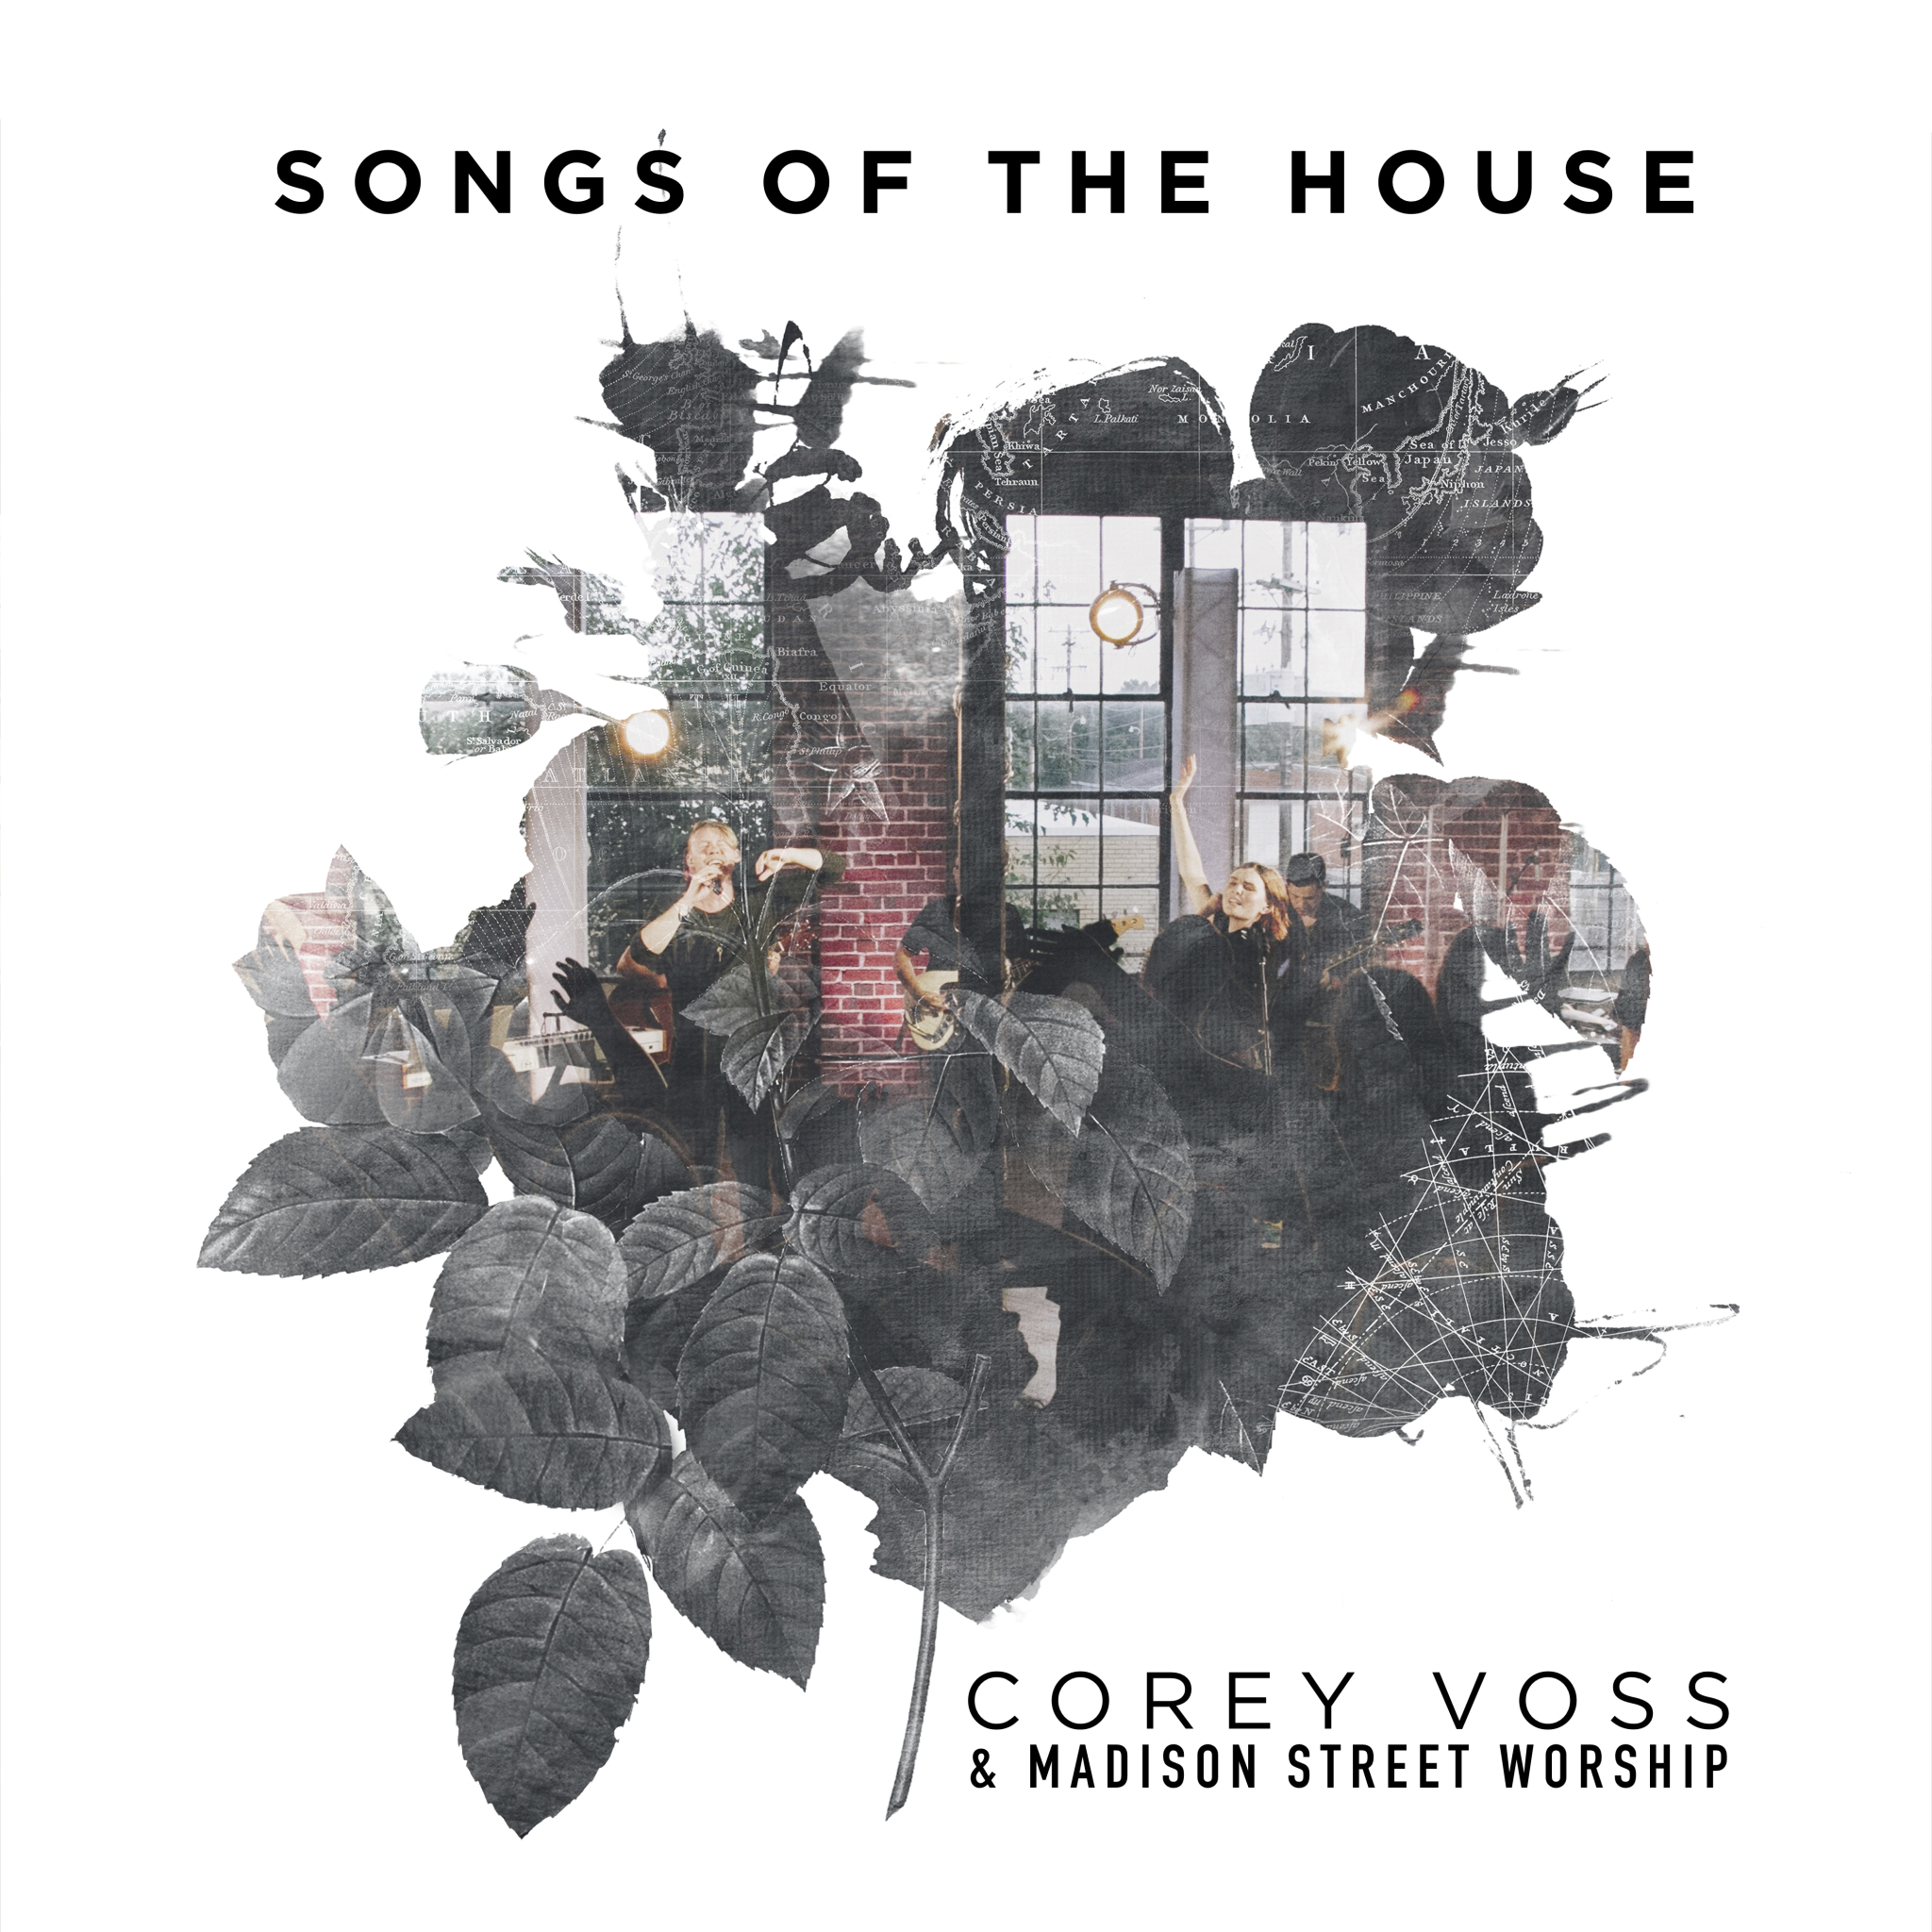 Songs of the house